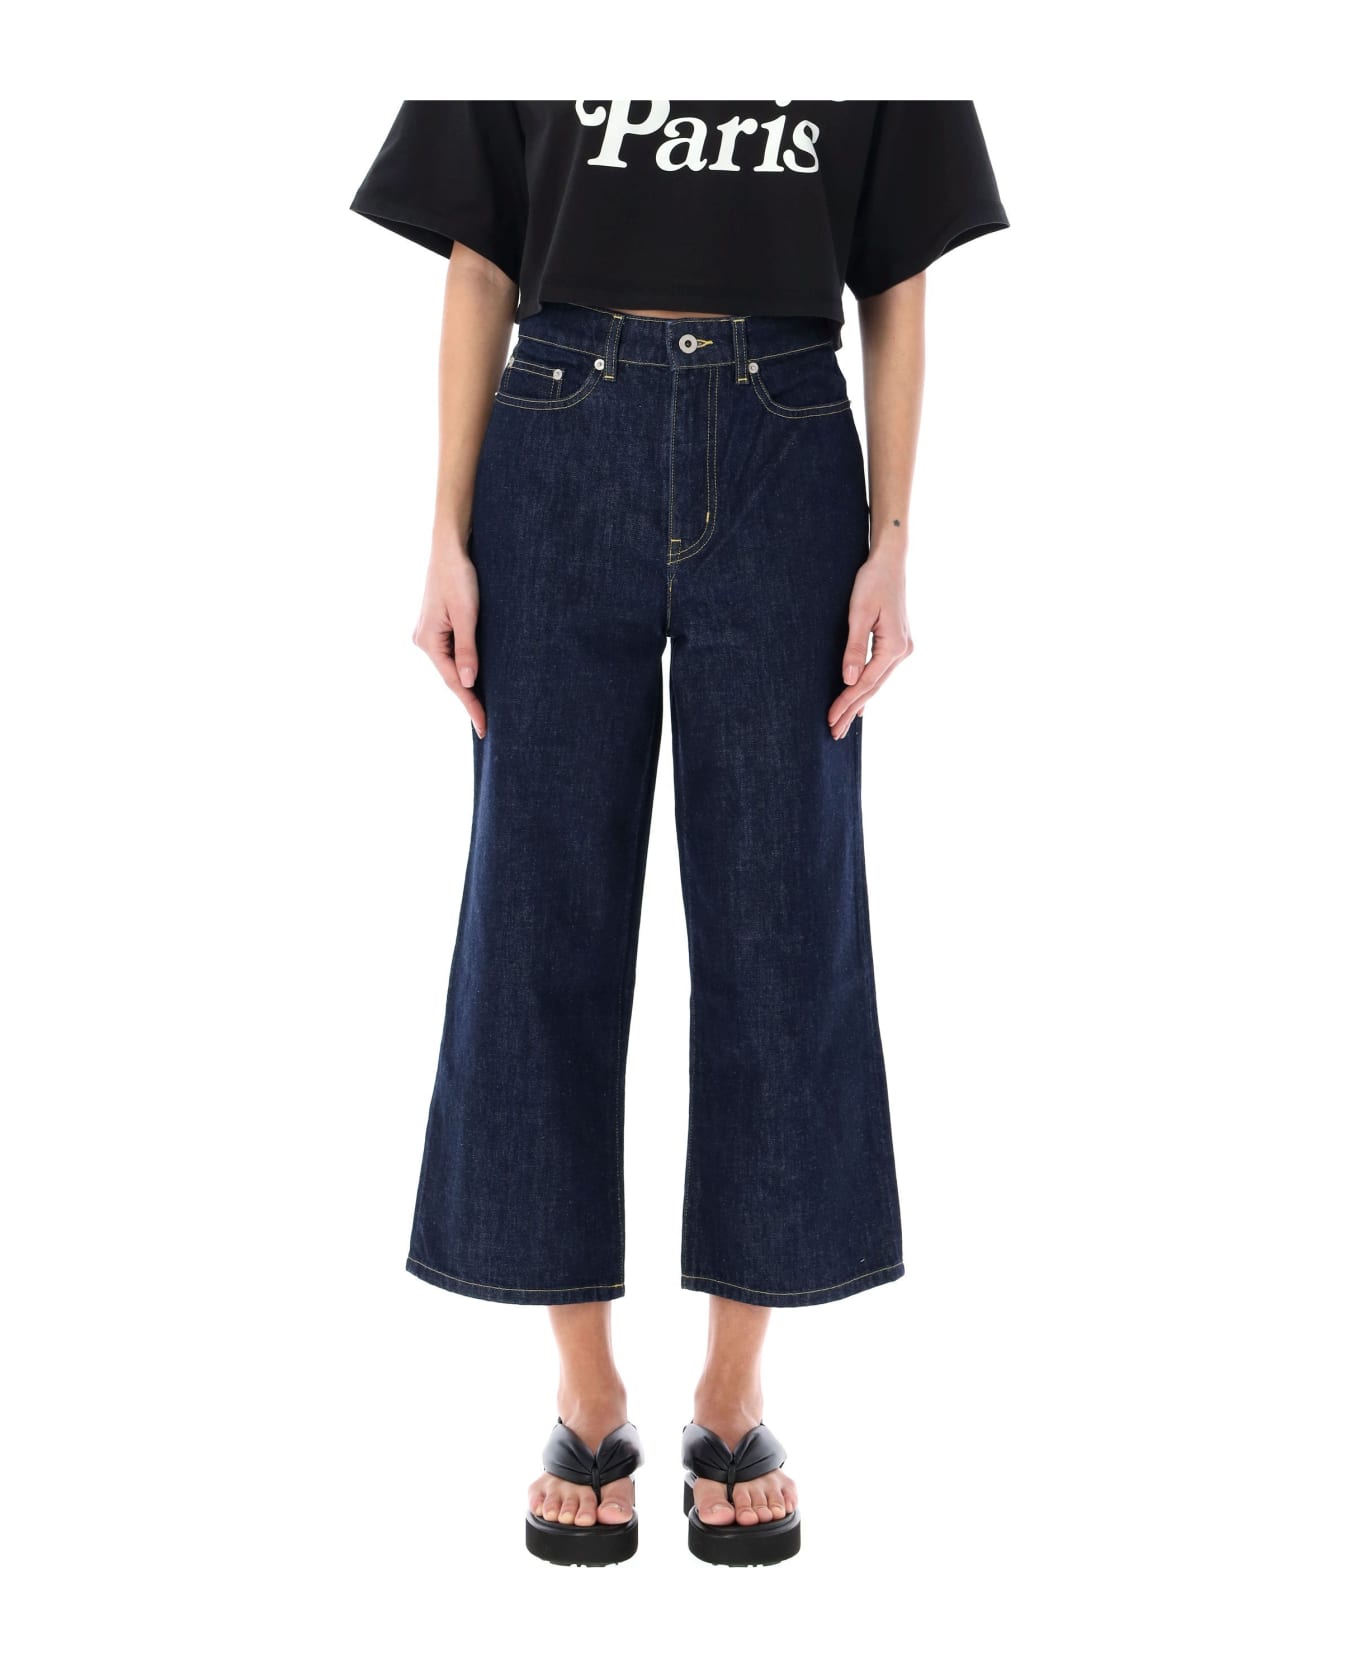 Kenzo Sumire Cropped Jeans - RINSED BLUE DENIN デニム